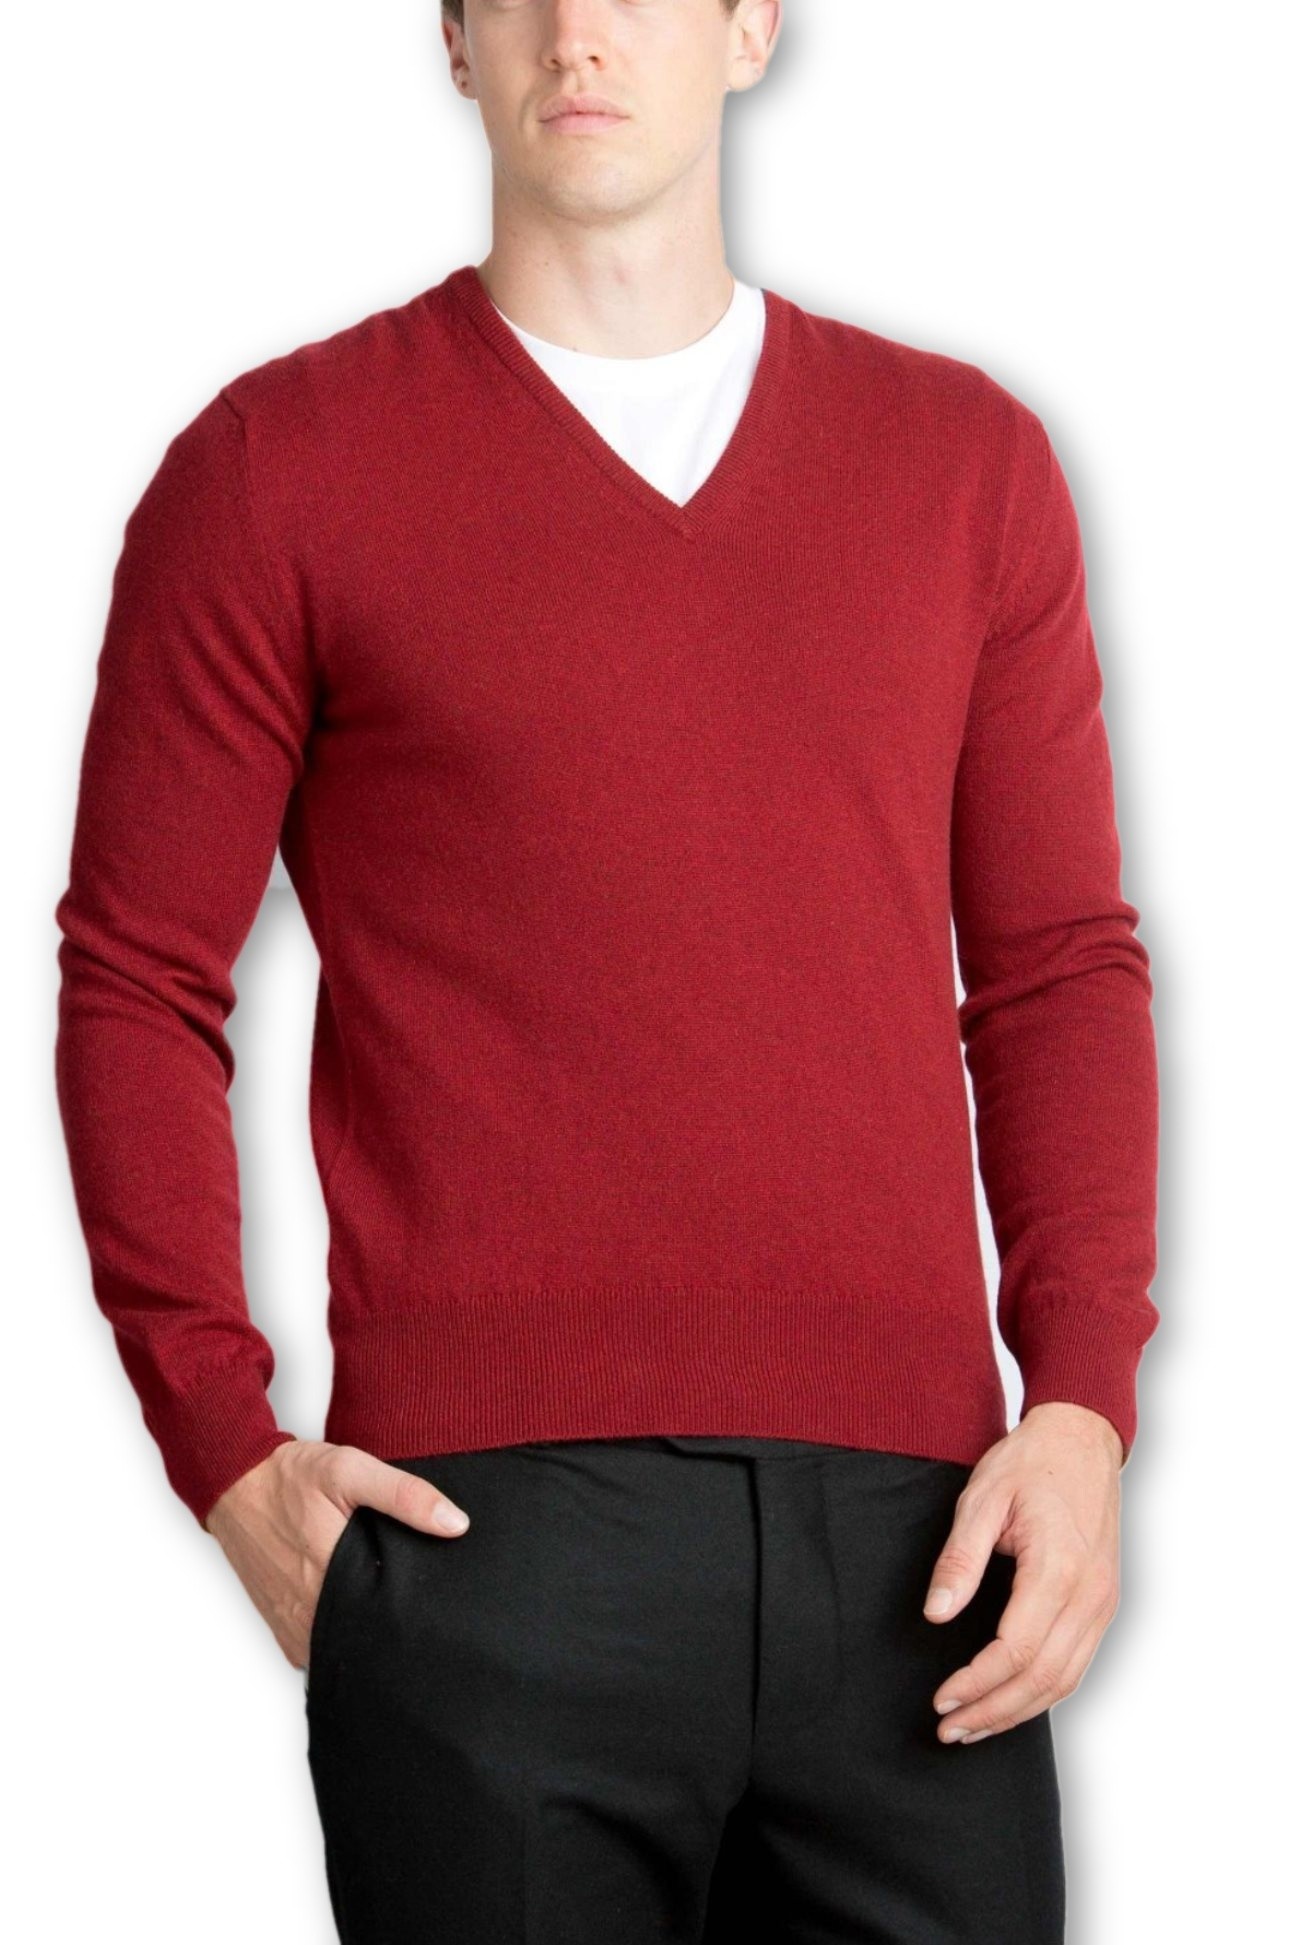 Buy > dark red cashmere sweater > in stock